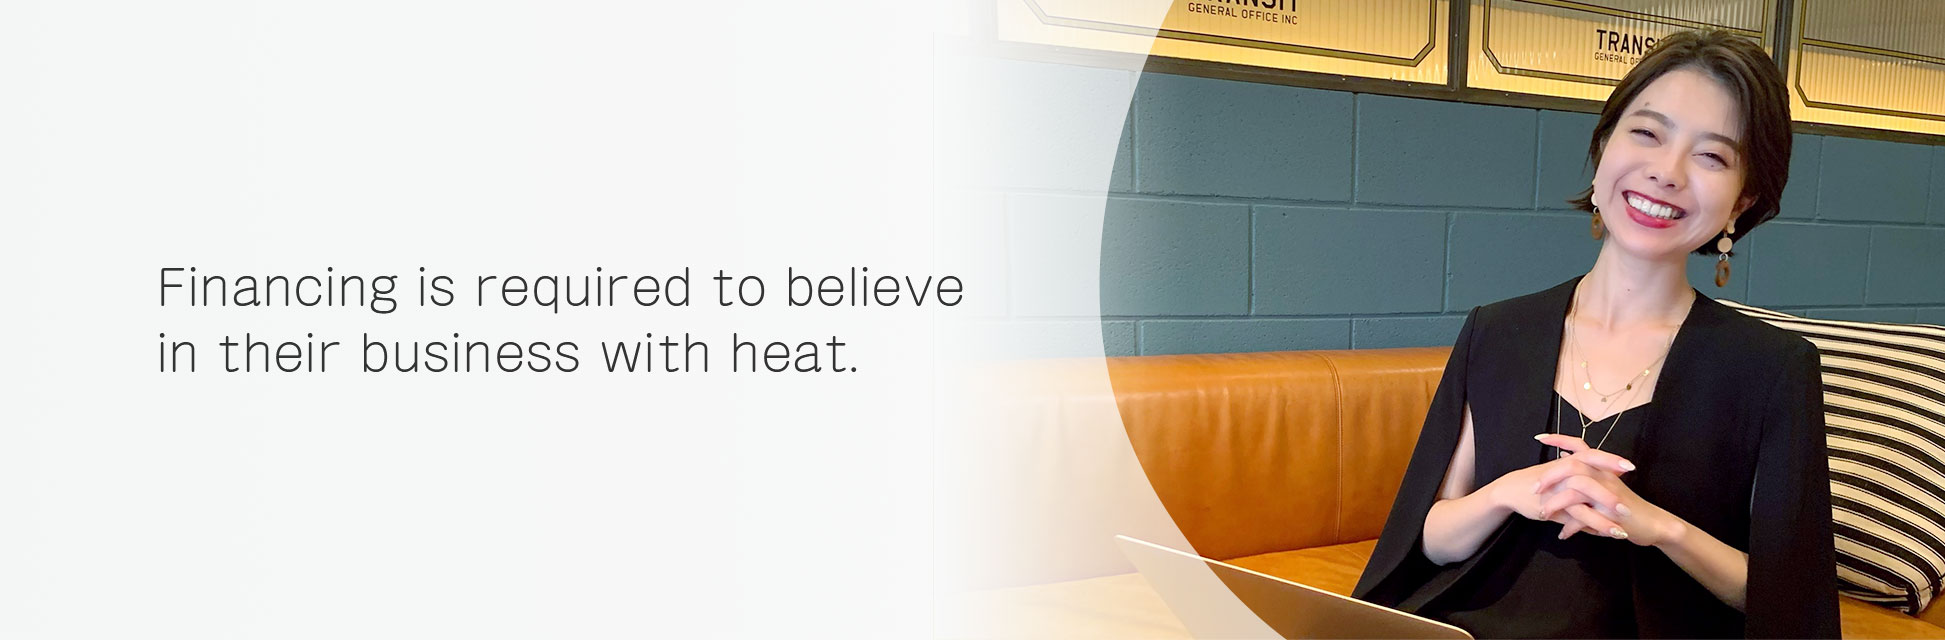 Financing is required to believe in their business with heat.